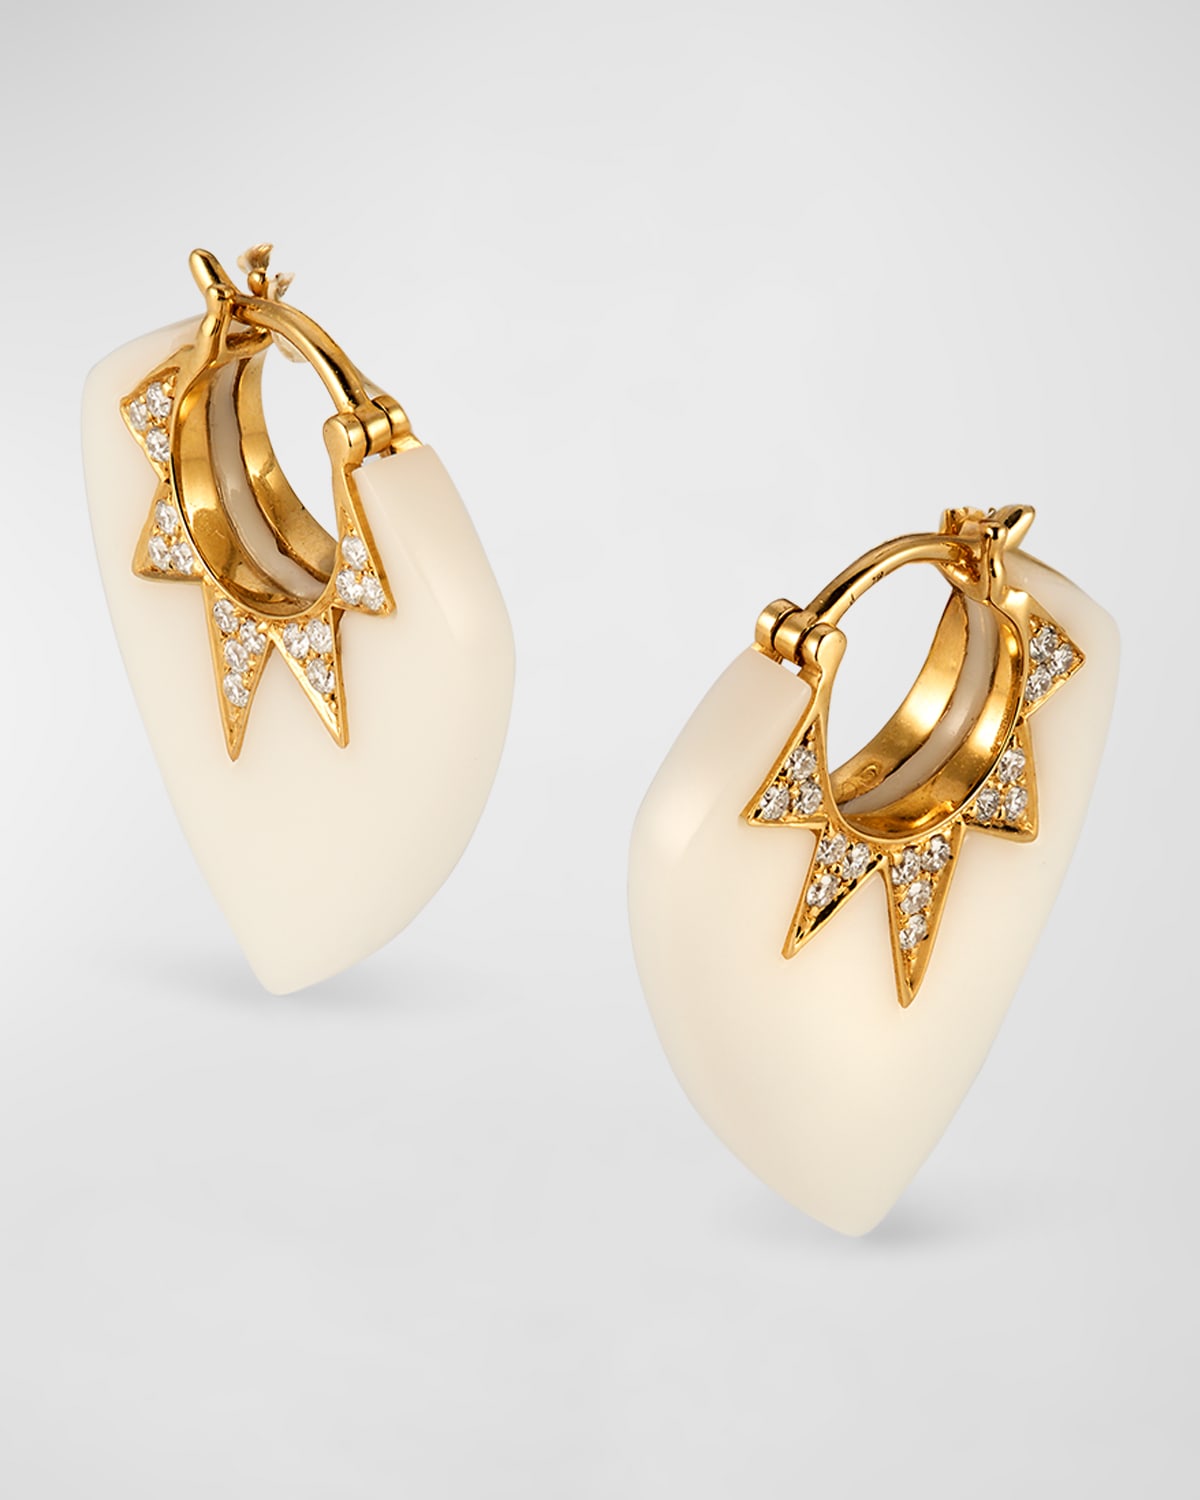 Sorellina 18k Yellow Gold Earrings With White Onyx And Gh-si Diamonds, 25x20mm